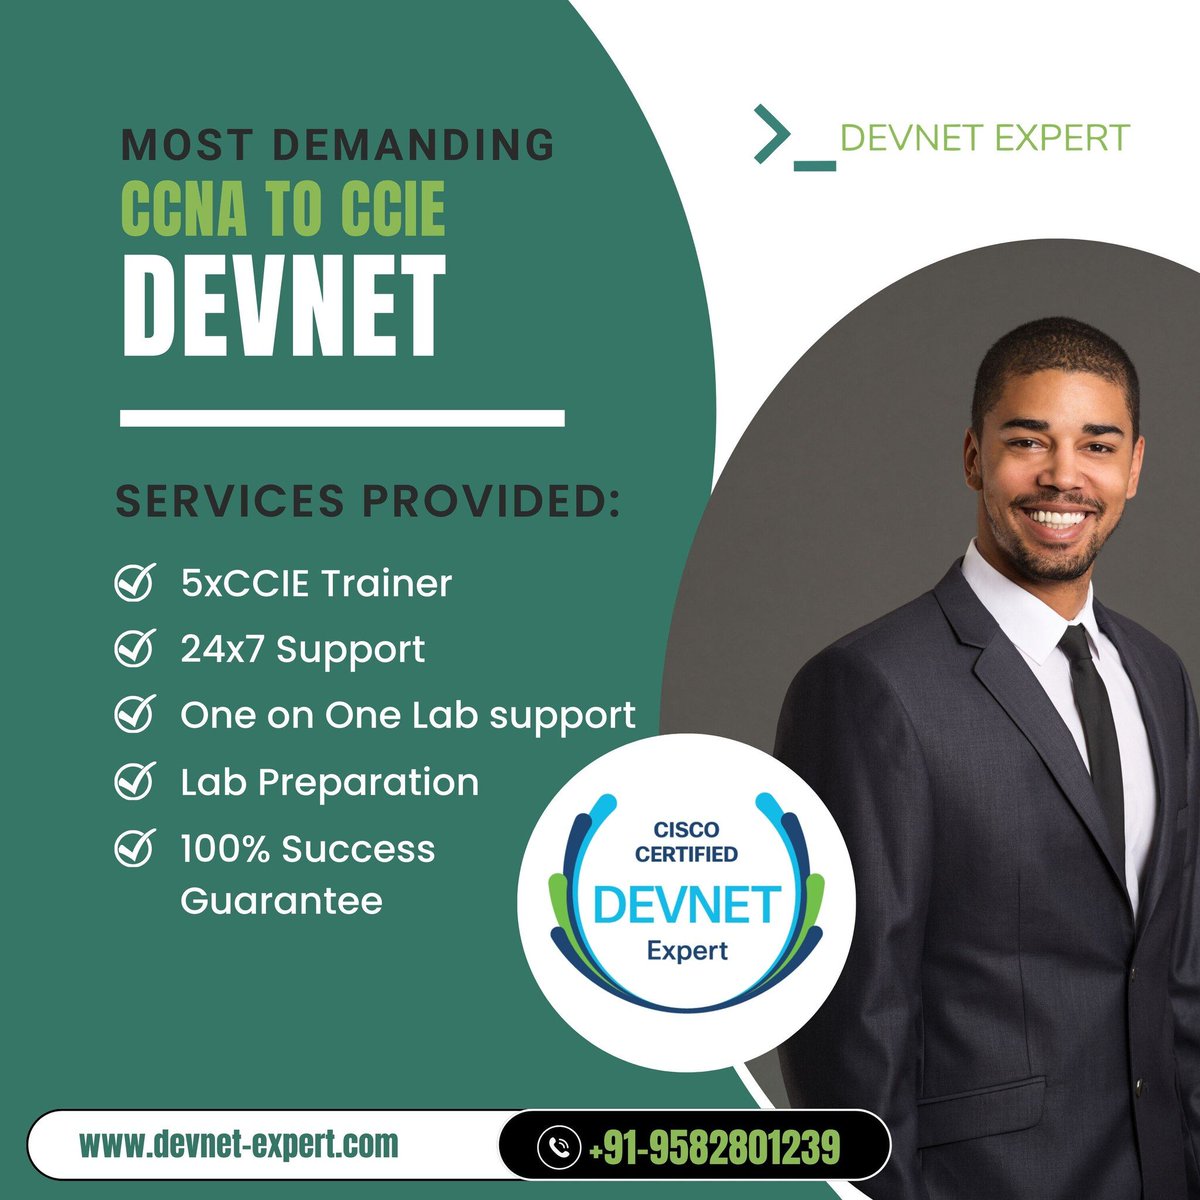 Here's why it can be a valuable career path:
𝗘𝗻𝗿𝗼𝗹𝗹 𝗻𝗼𝘄: devnet-expert.com
𝗖𝗼𝗻𝘁𝗮𝗰𝘁 𝘂𝘀: +91-9582-801-239
𝗘𝗺𝗮𝗶𝗹: info@devnet-expert.com
#CCNA #CCIE #DevNet #Networking #NetworkEngineer #CiscoCertification #NetworkSecurity #Automation #SDN #CloudNetwork